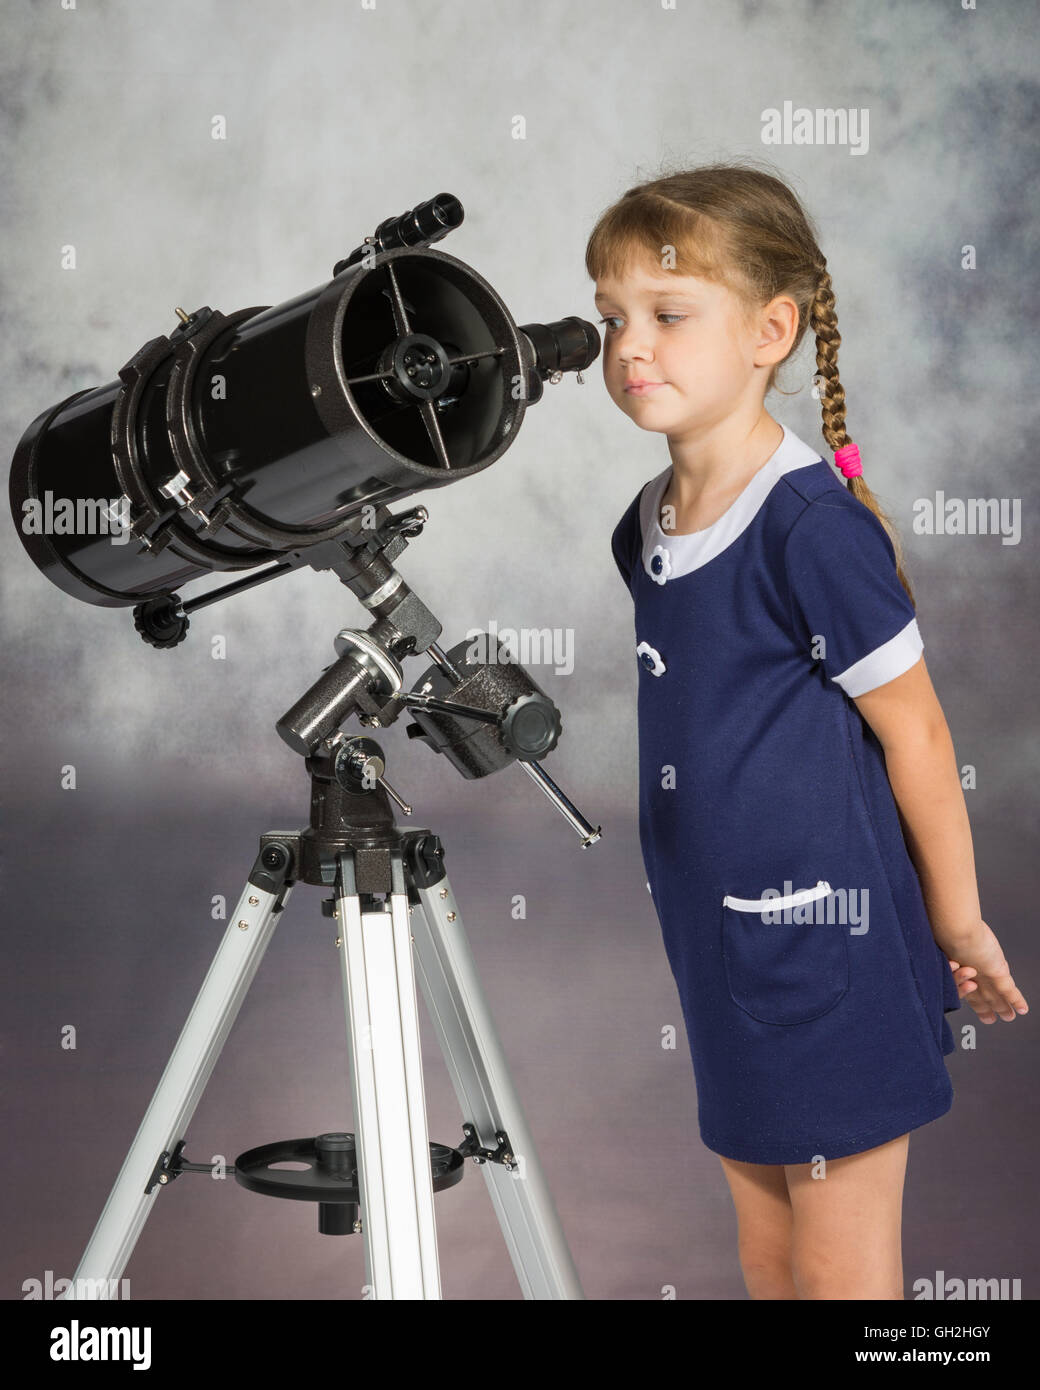 Girl lover of astronomy with interest looks in the eyepiece of the telescope Stock Photo